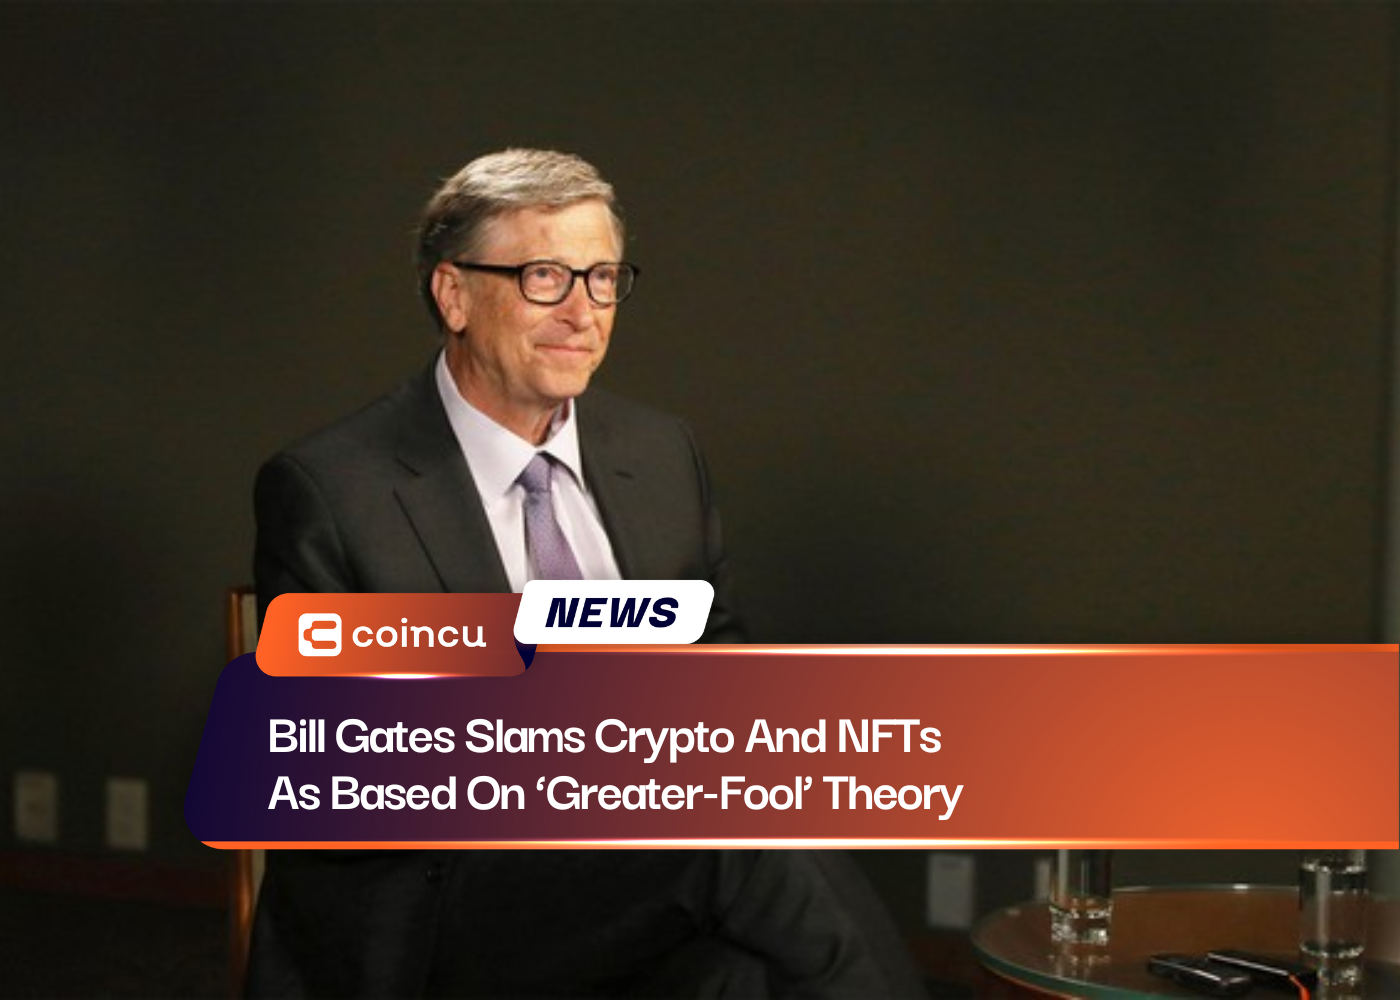 Bill Gates Slams Crypto And NFTs As Based On 'Greater-Fool' Theory